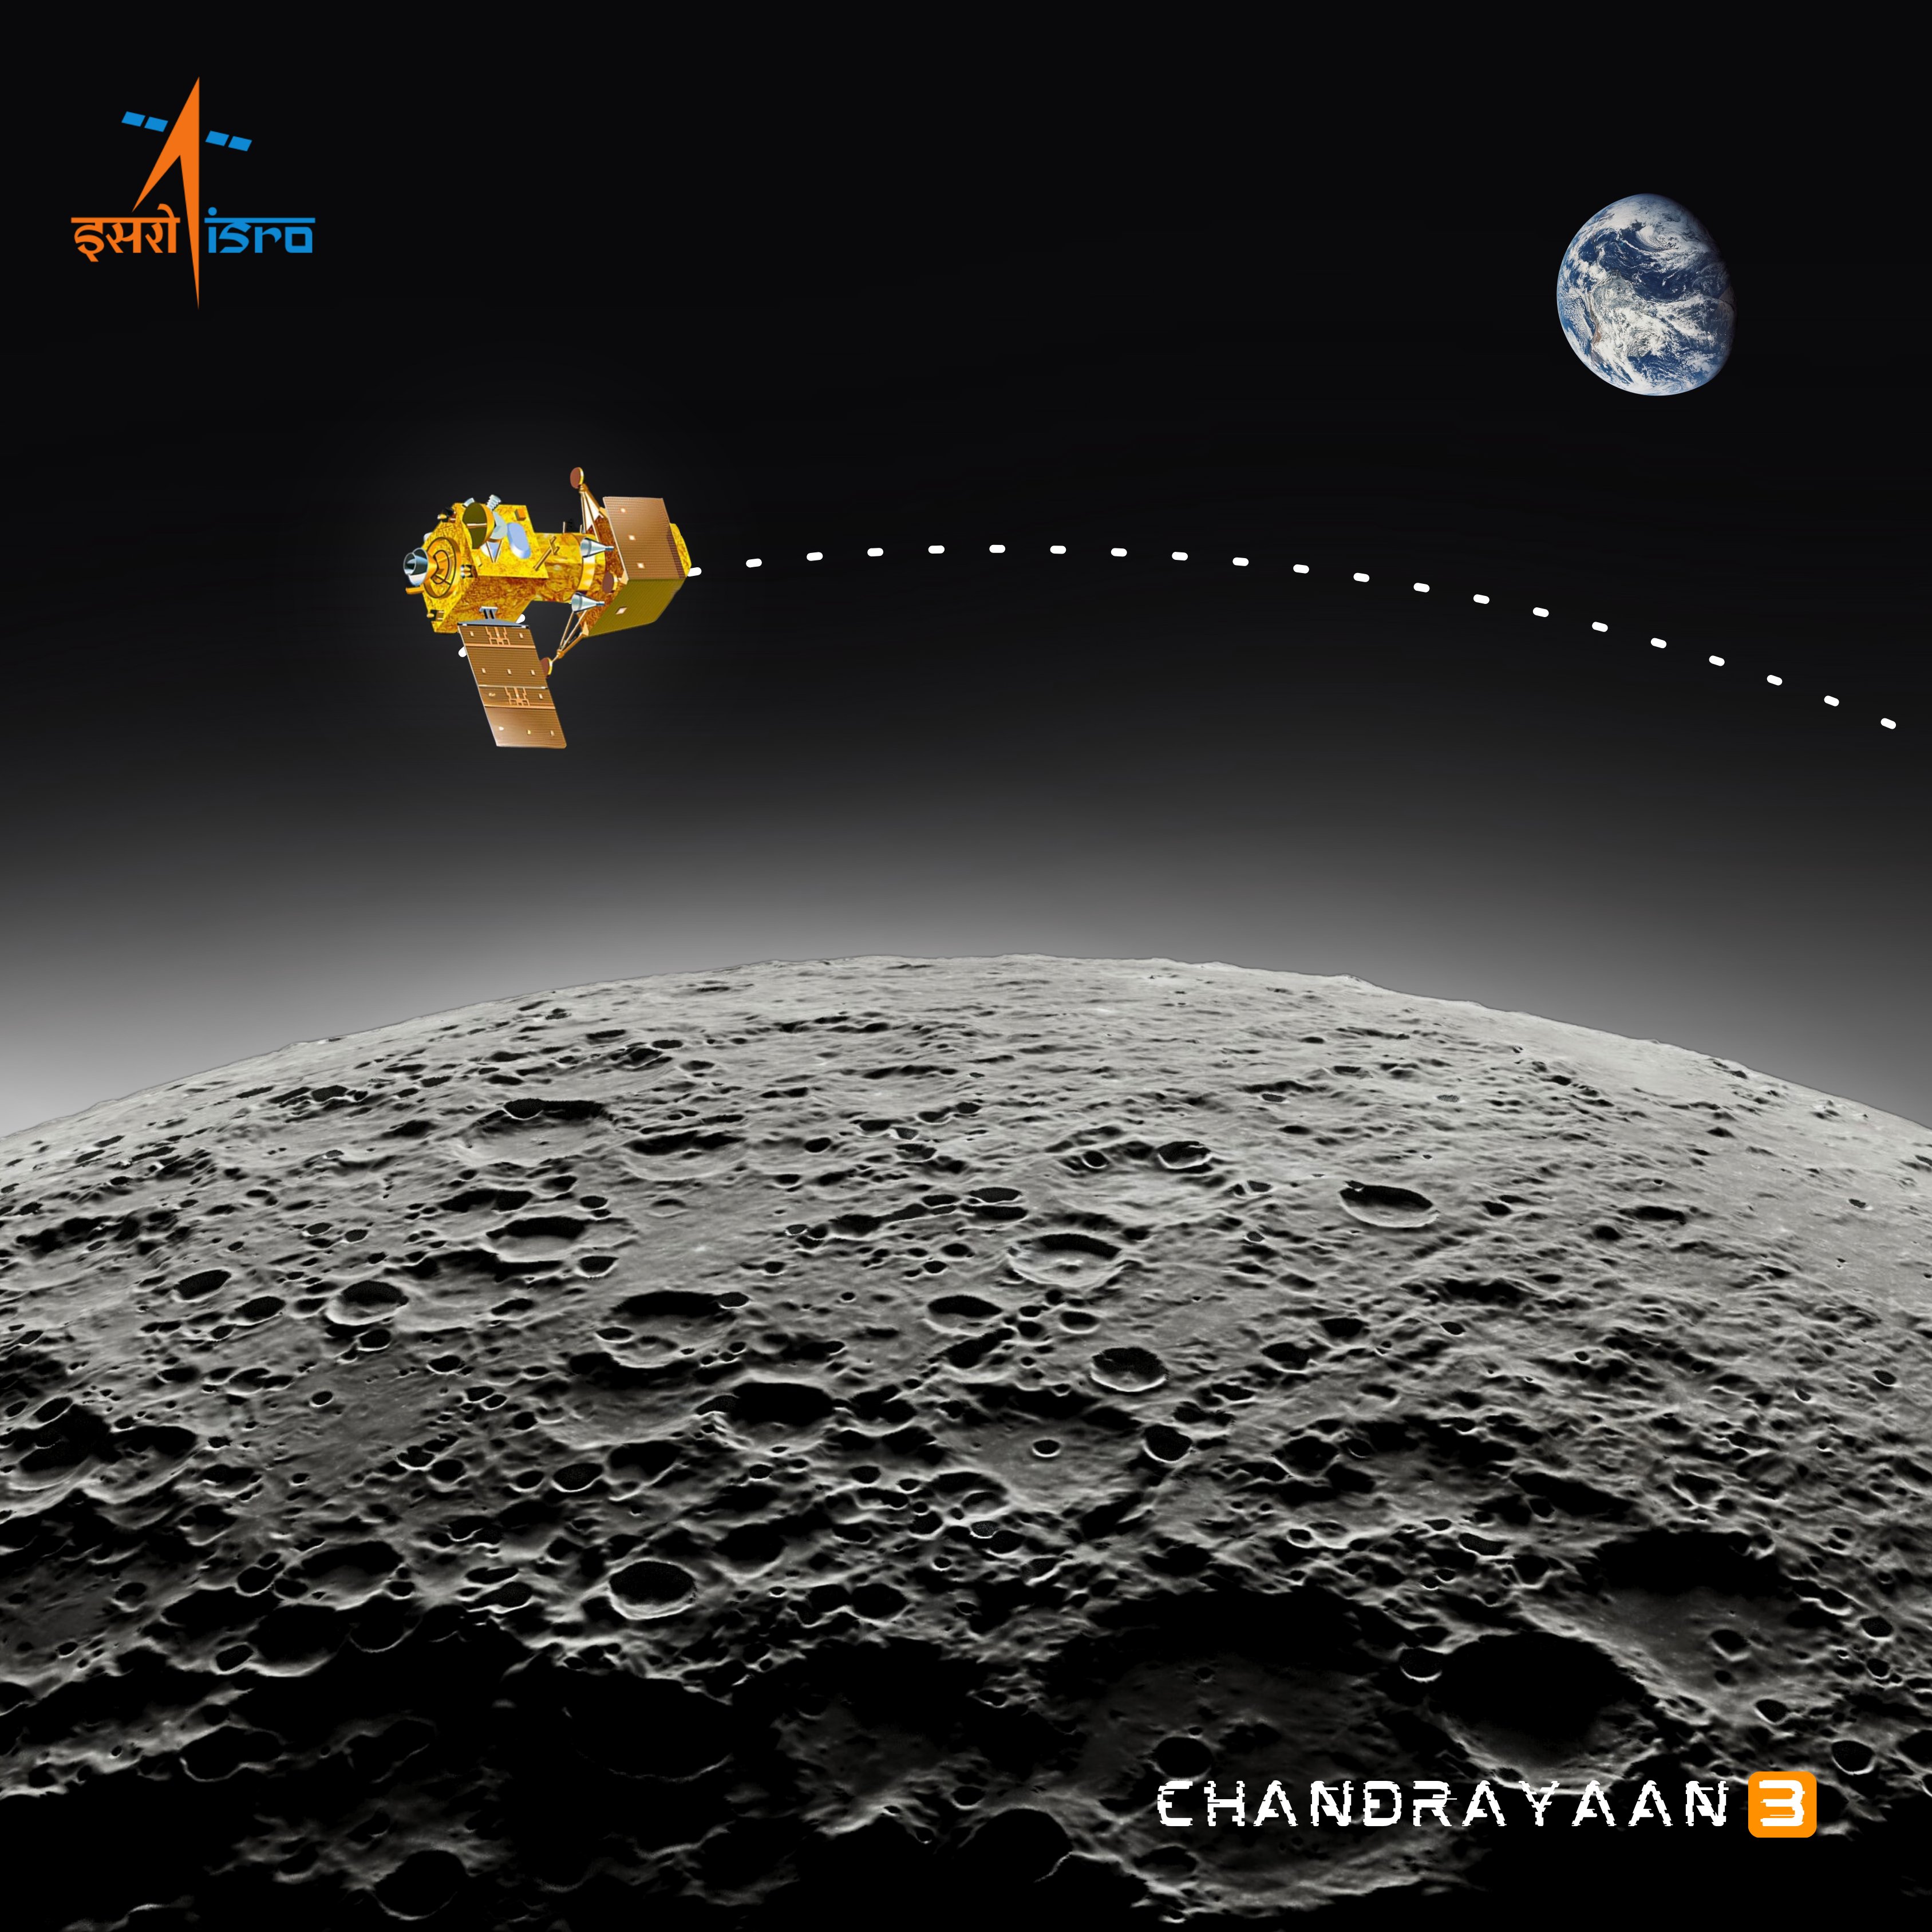 Picture-perfect view: Chandrayaan-3 captures Moon and Earth in